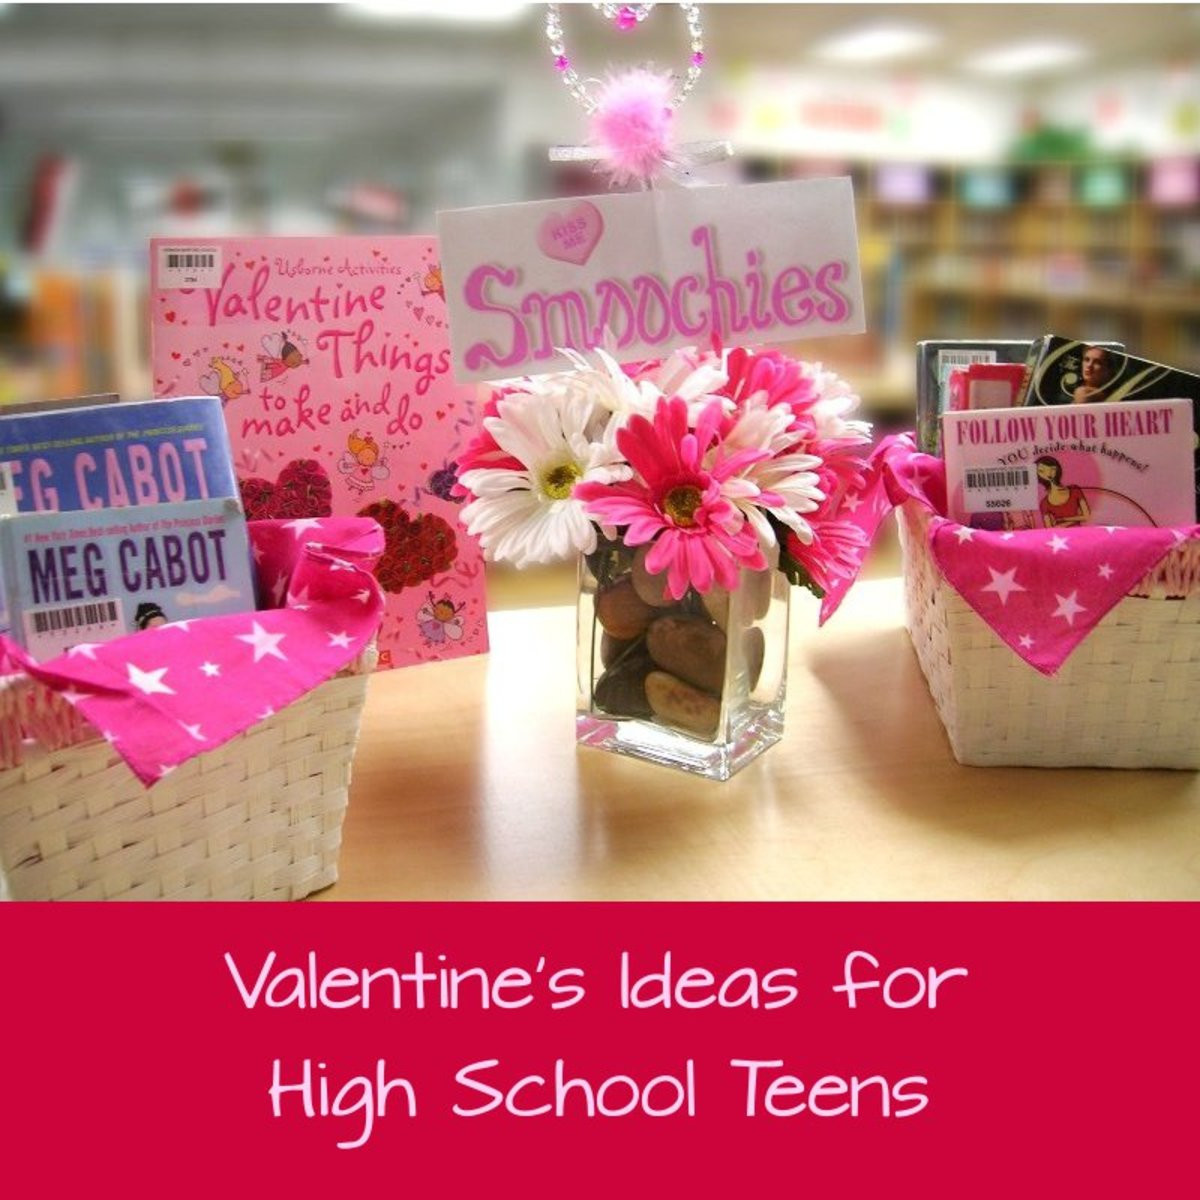 Valentines Gift Ideas For Young Daughter
 Valentine s Day Gift Ideas for High School Teens